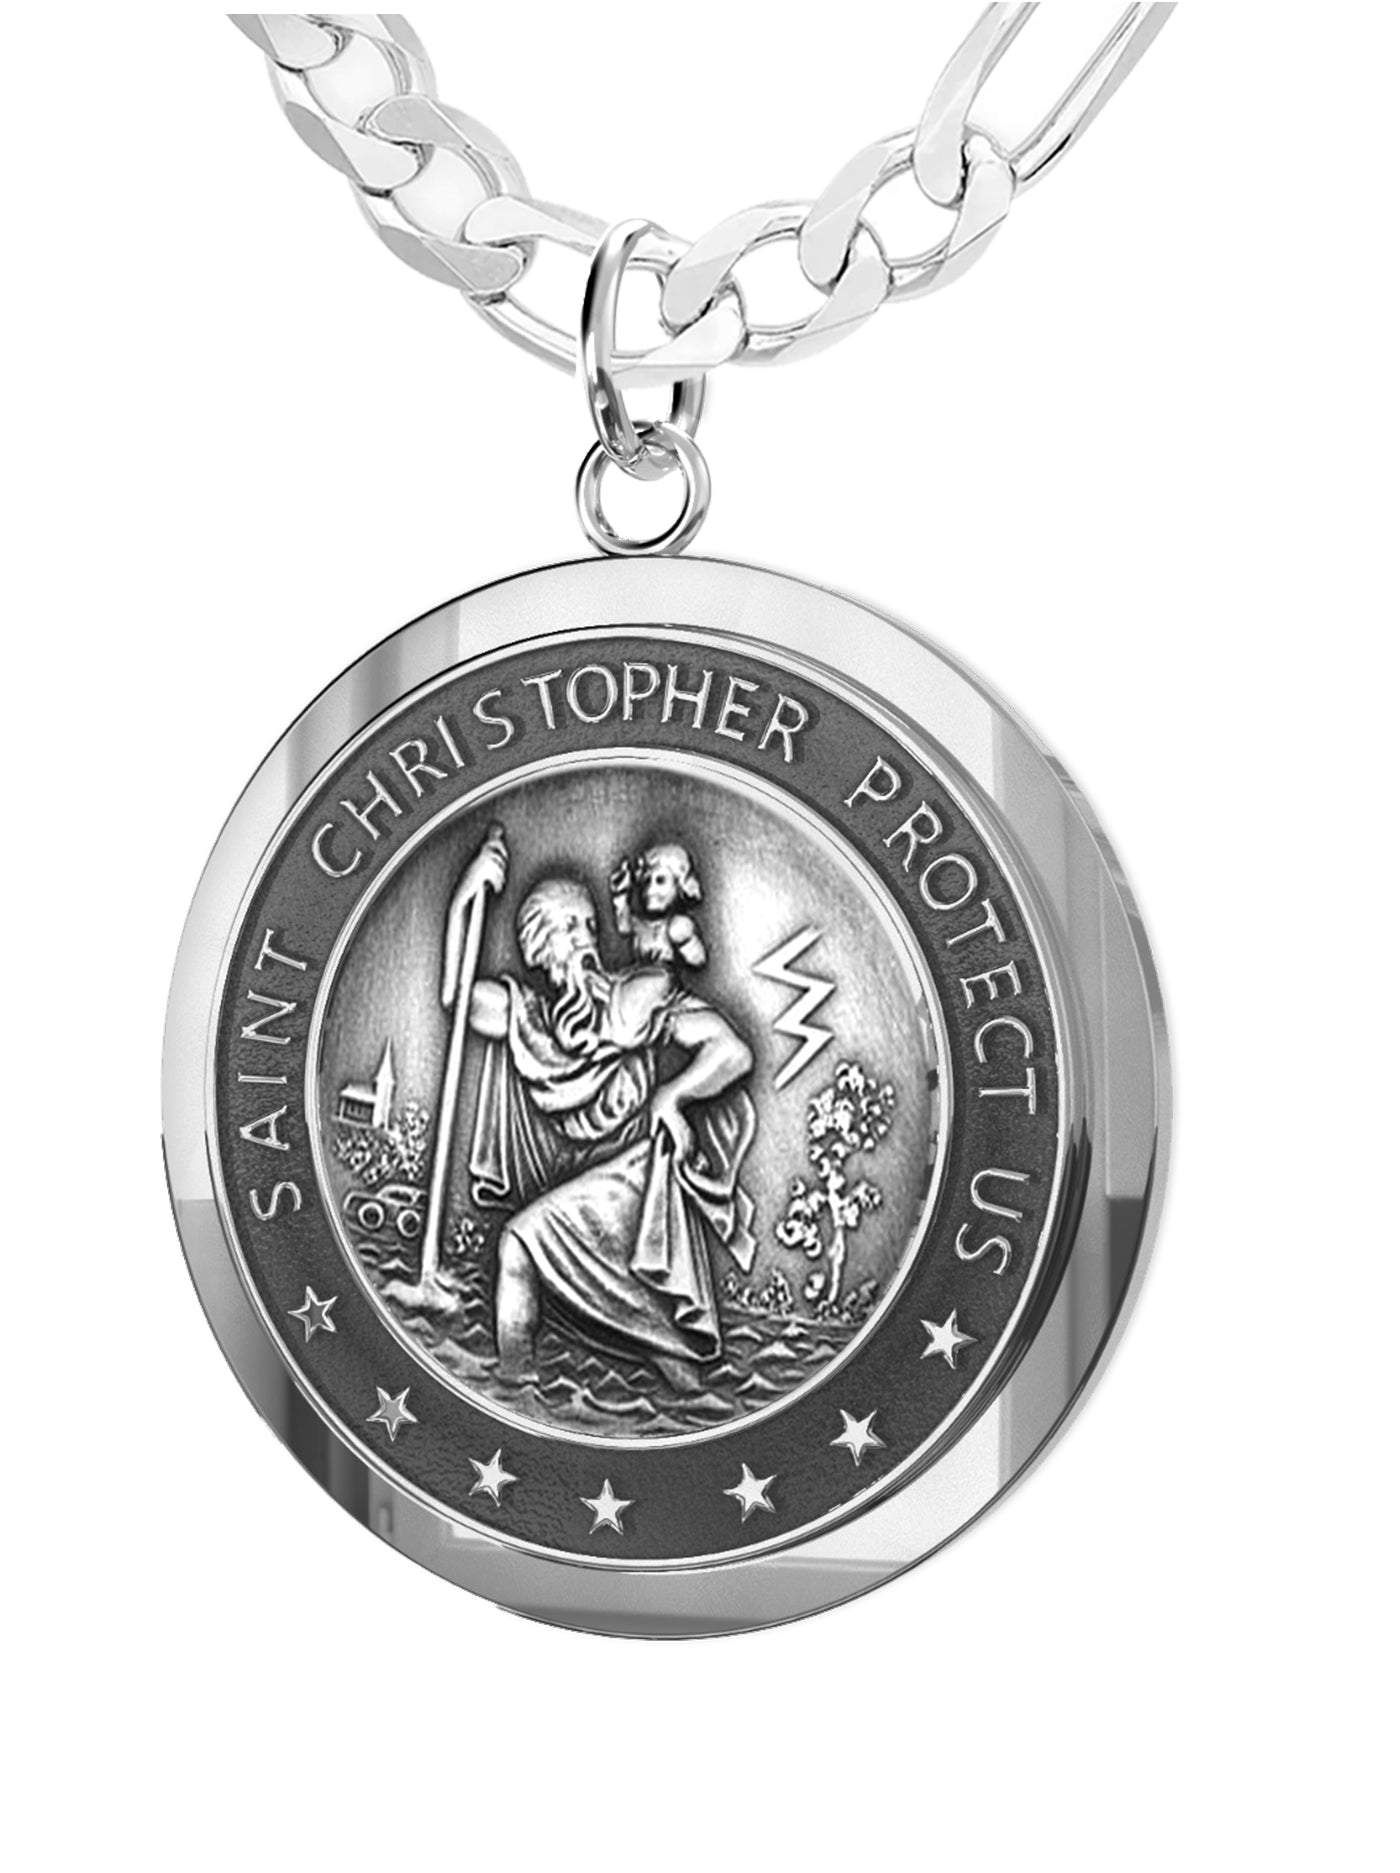 Men's 925 Sterling Silver Saint Christopher Round Antique Pendant Necklace,  25mm - 22in 3.2mm Figaro Chain